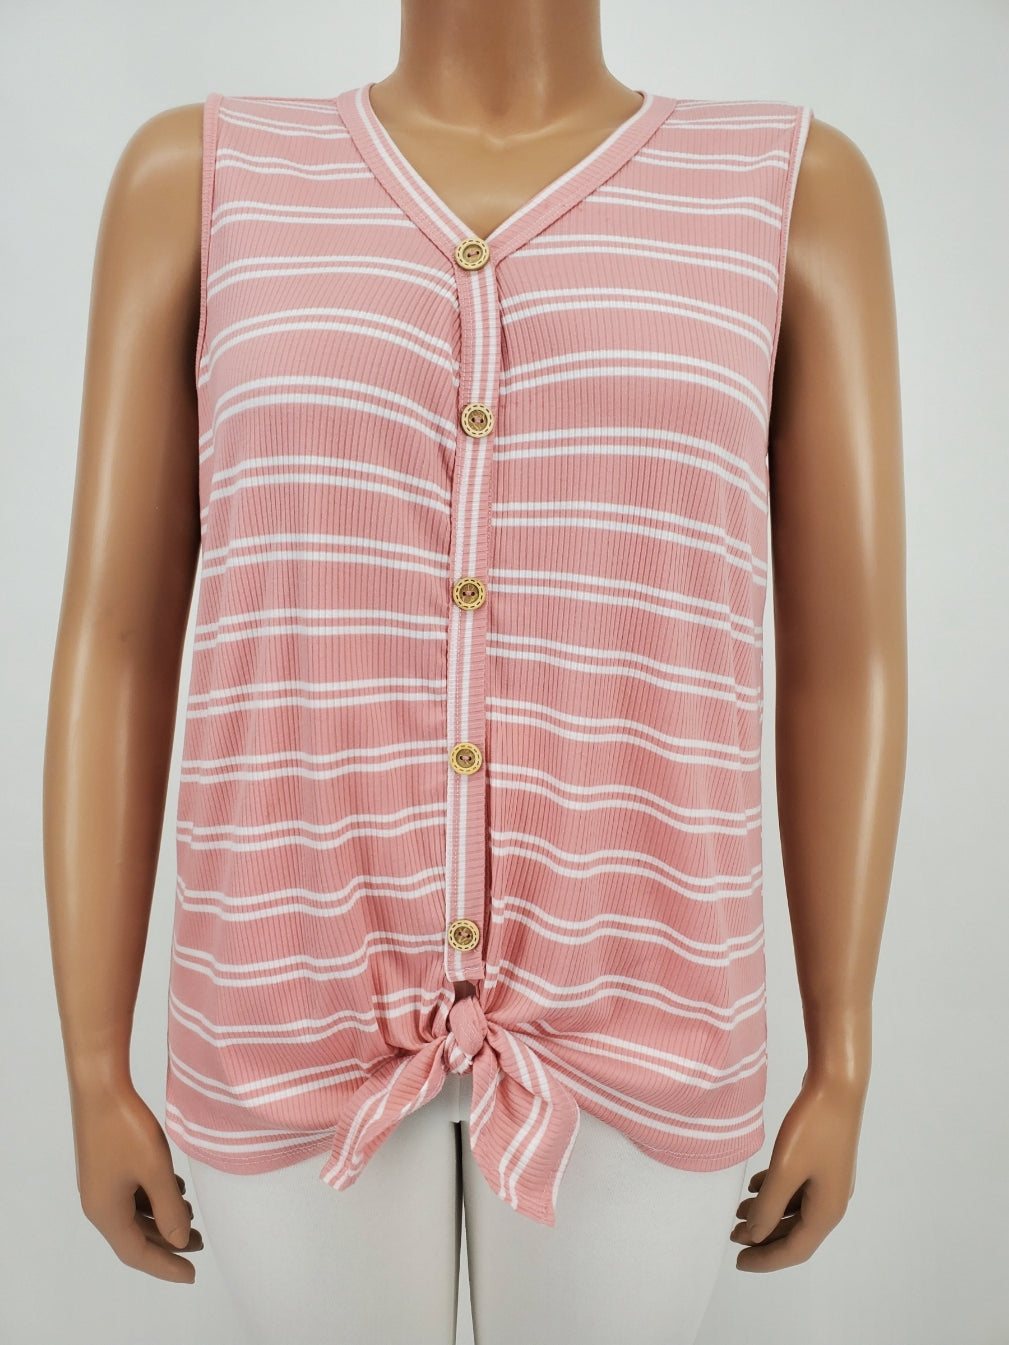 Faux Button Sleeveless Top with Front Tie Plus Size (Pink/White)